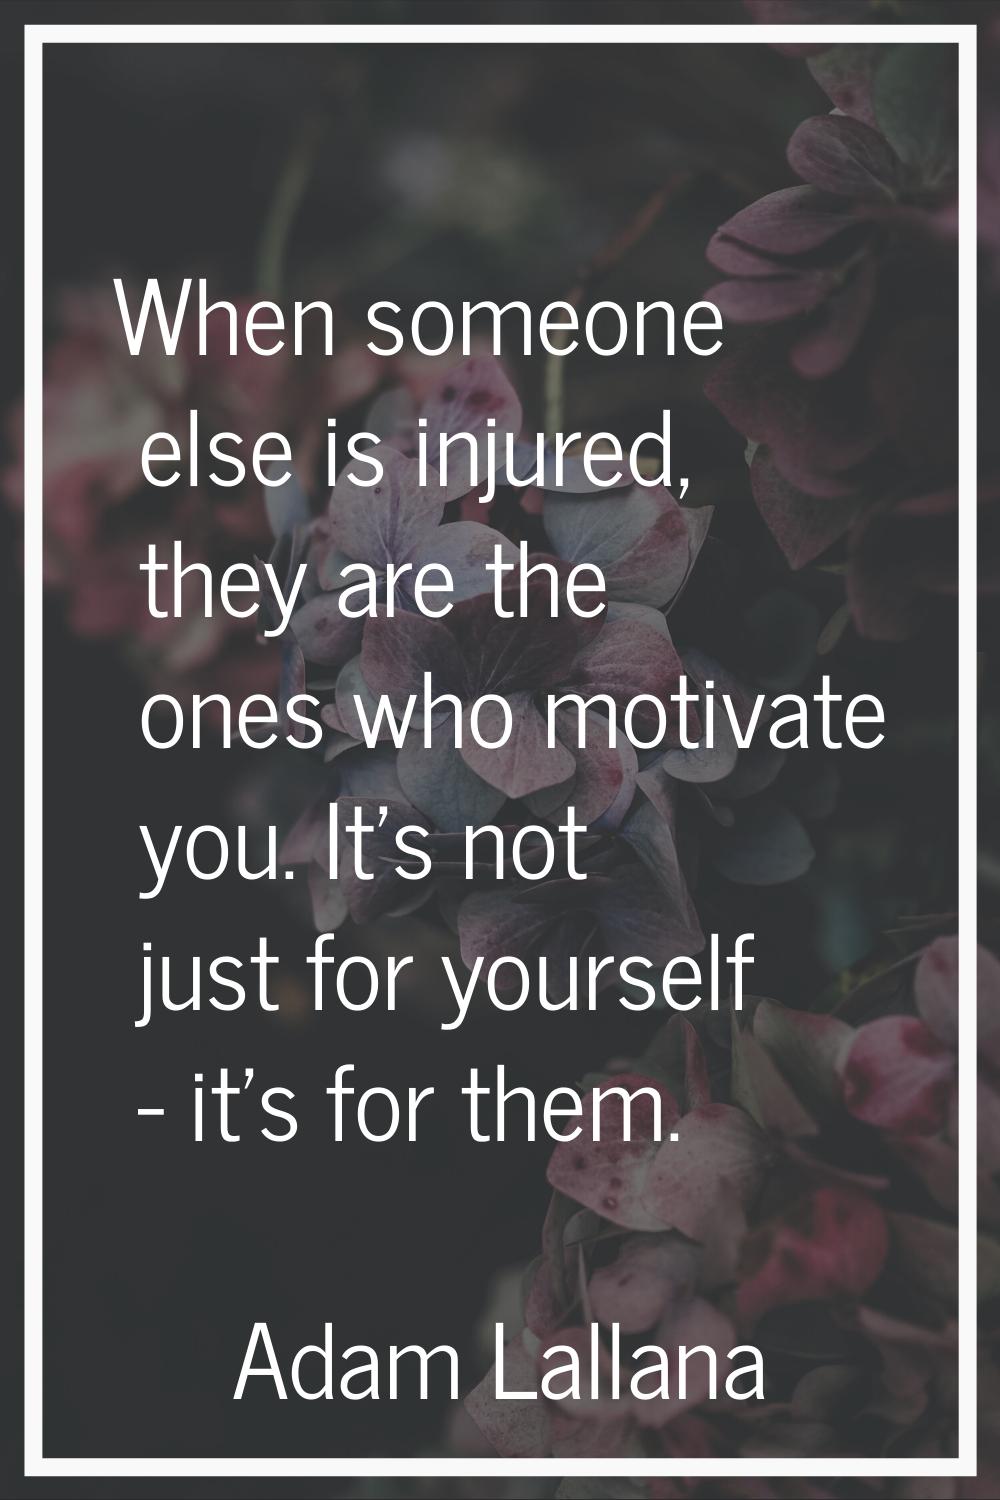 When someone else is injured, they are the ones who motivate you. It's not just for yourself - it's